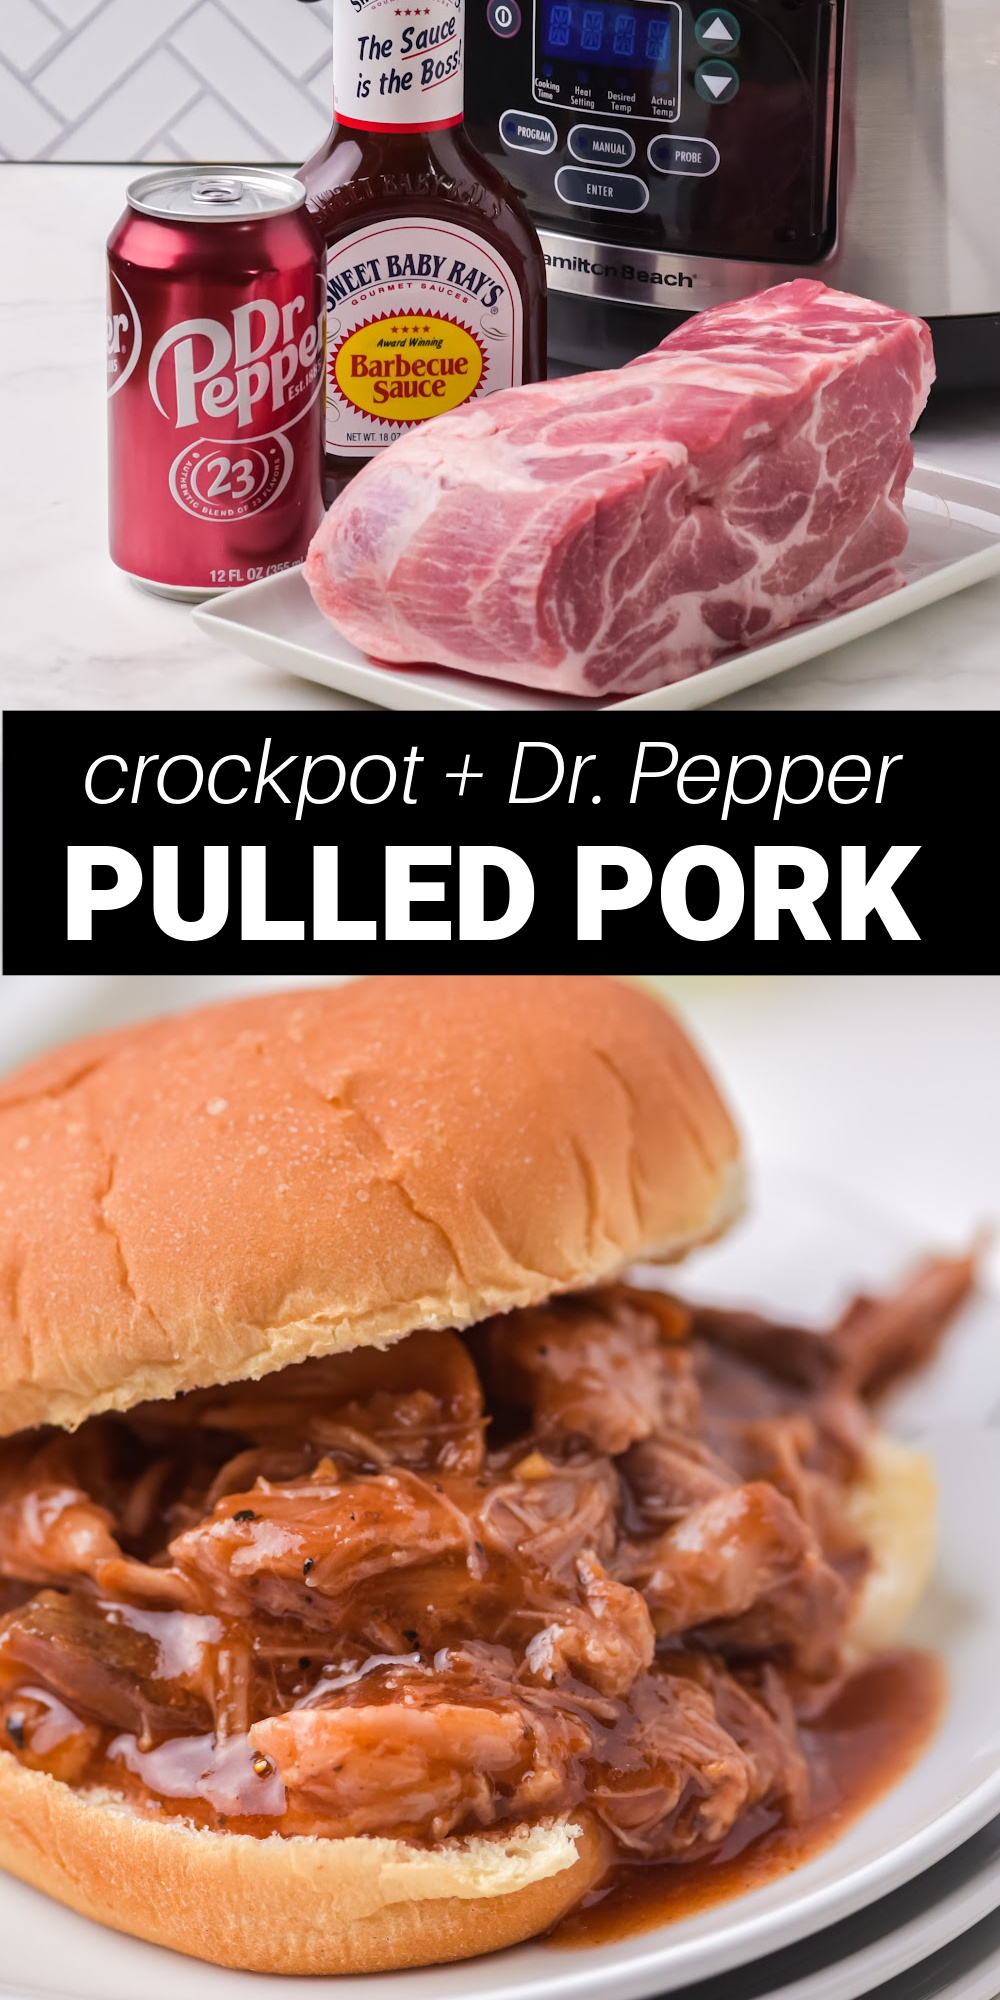 This sweet and savory Crockpot Dr. Pepper Pulled Pork is so incredibly juicy, flavorful and fall-apart tender. If you're looking for the perfect stress-free meal, you've come to the right place. This recipe is ideal for an easy lunch or dinner option, or for those times when you are feeding a hungry crowd.